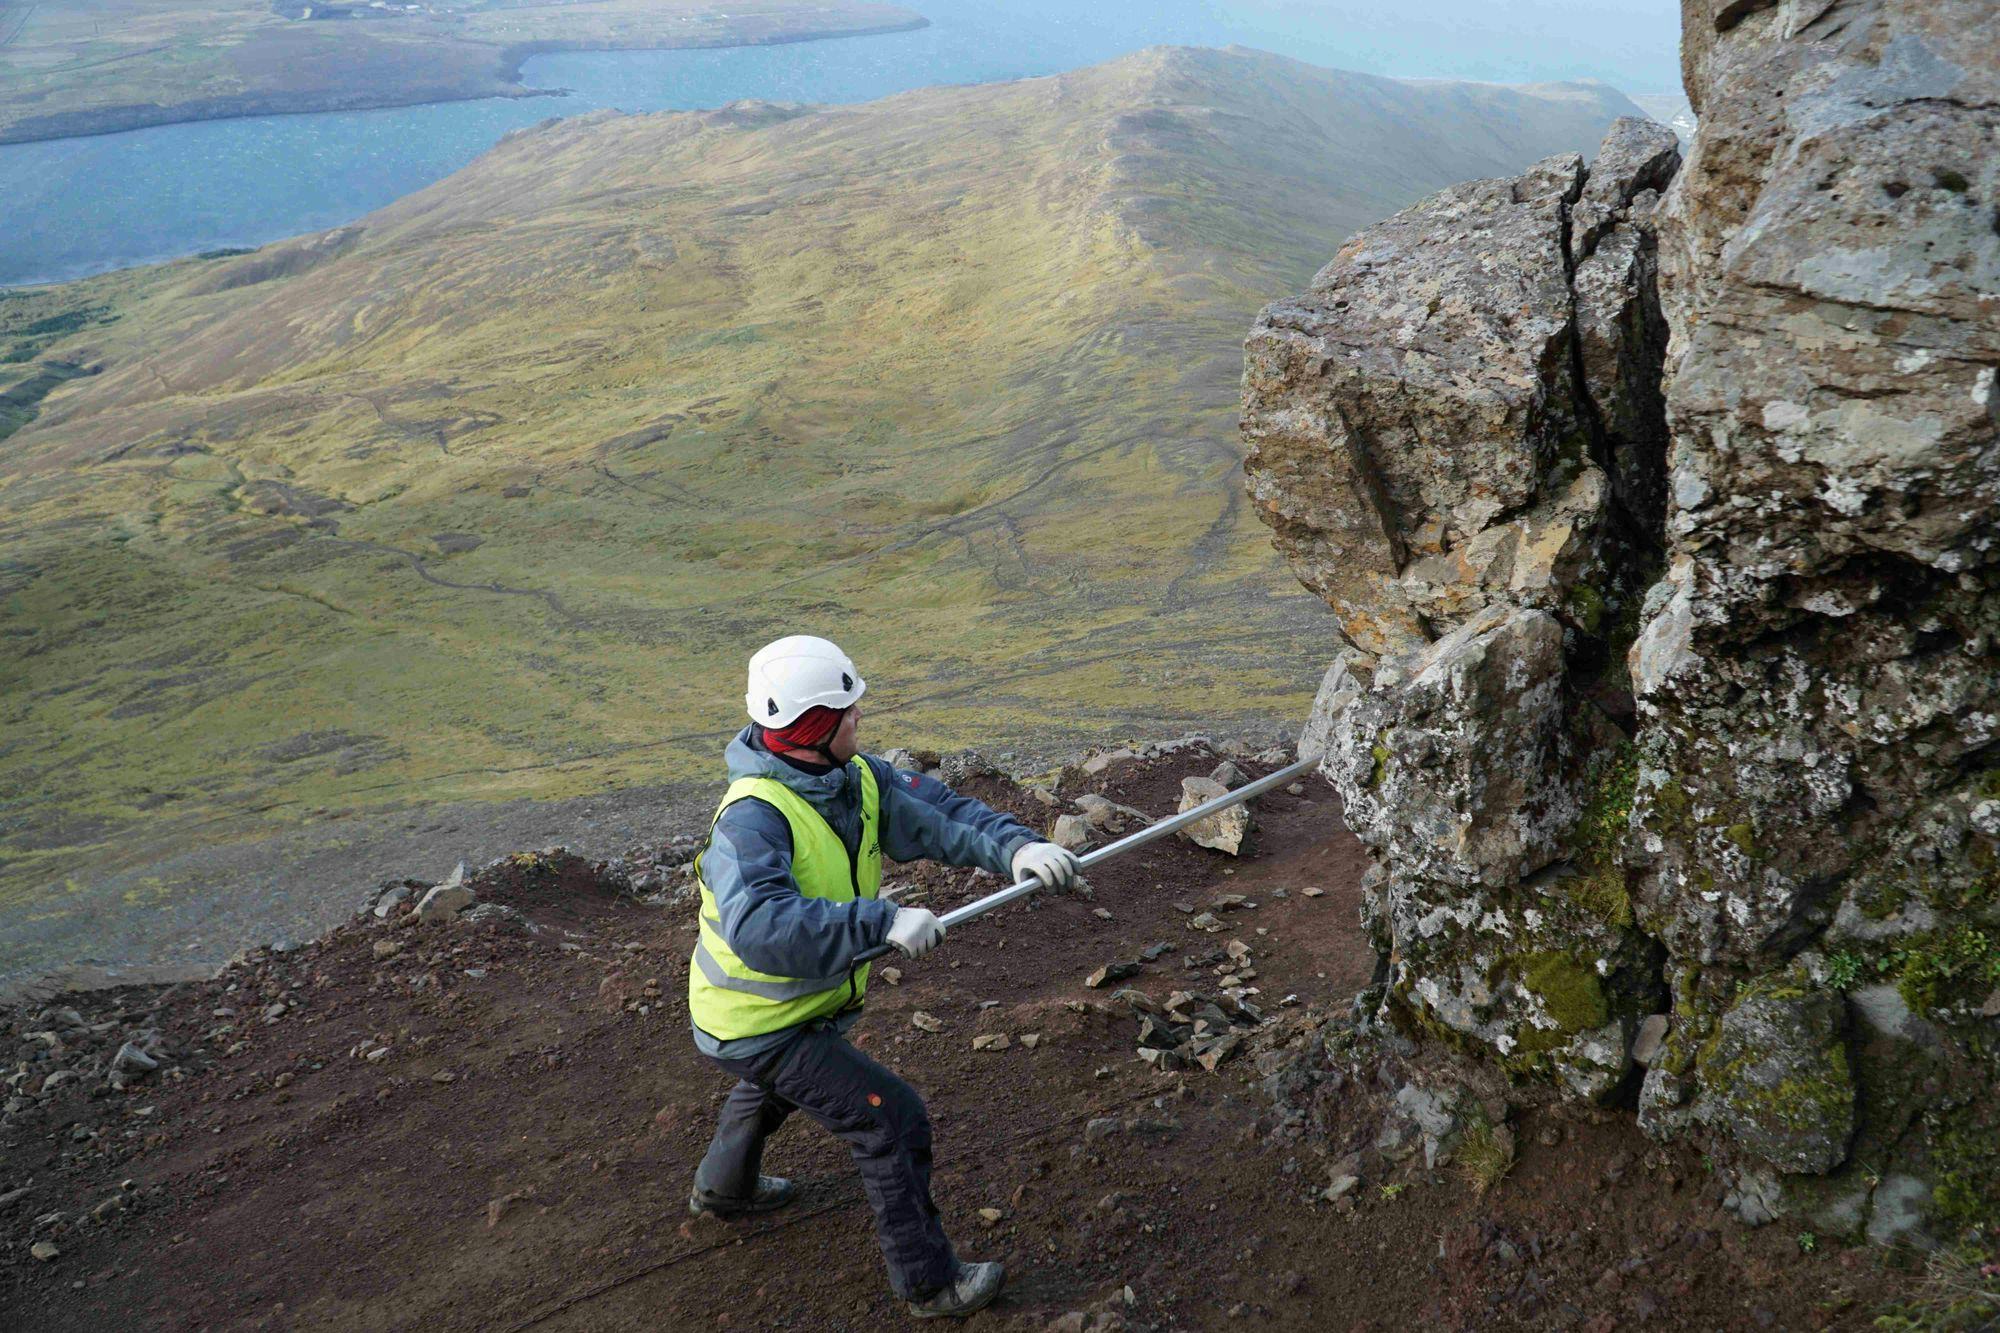 An individual wearing high visibility jacket, working on a rocky hillside with a stick